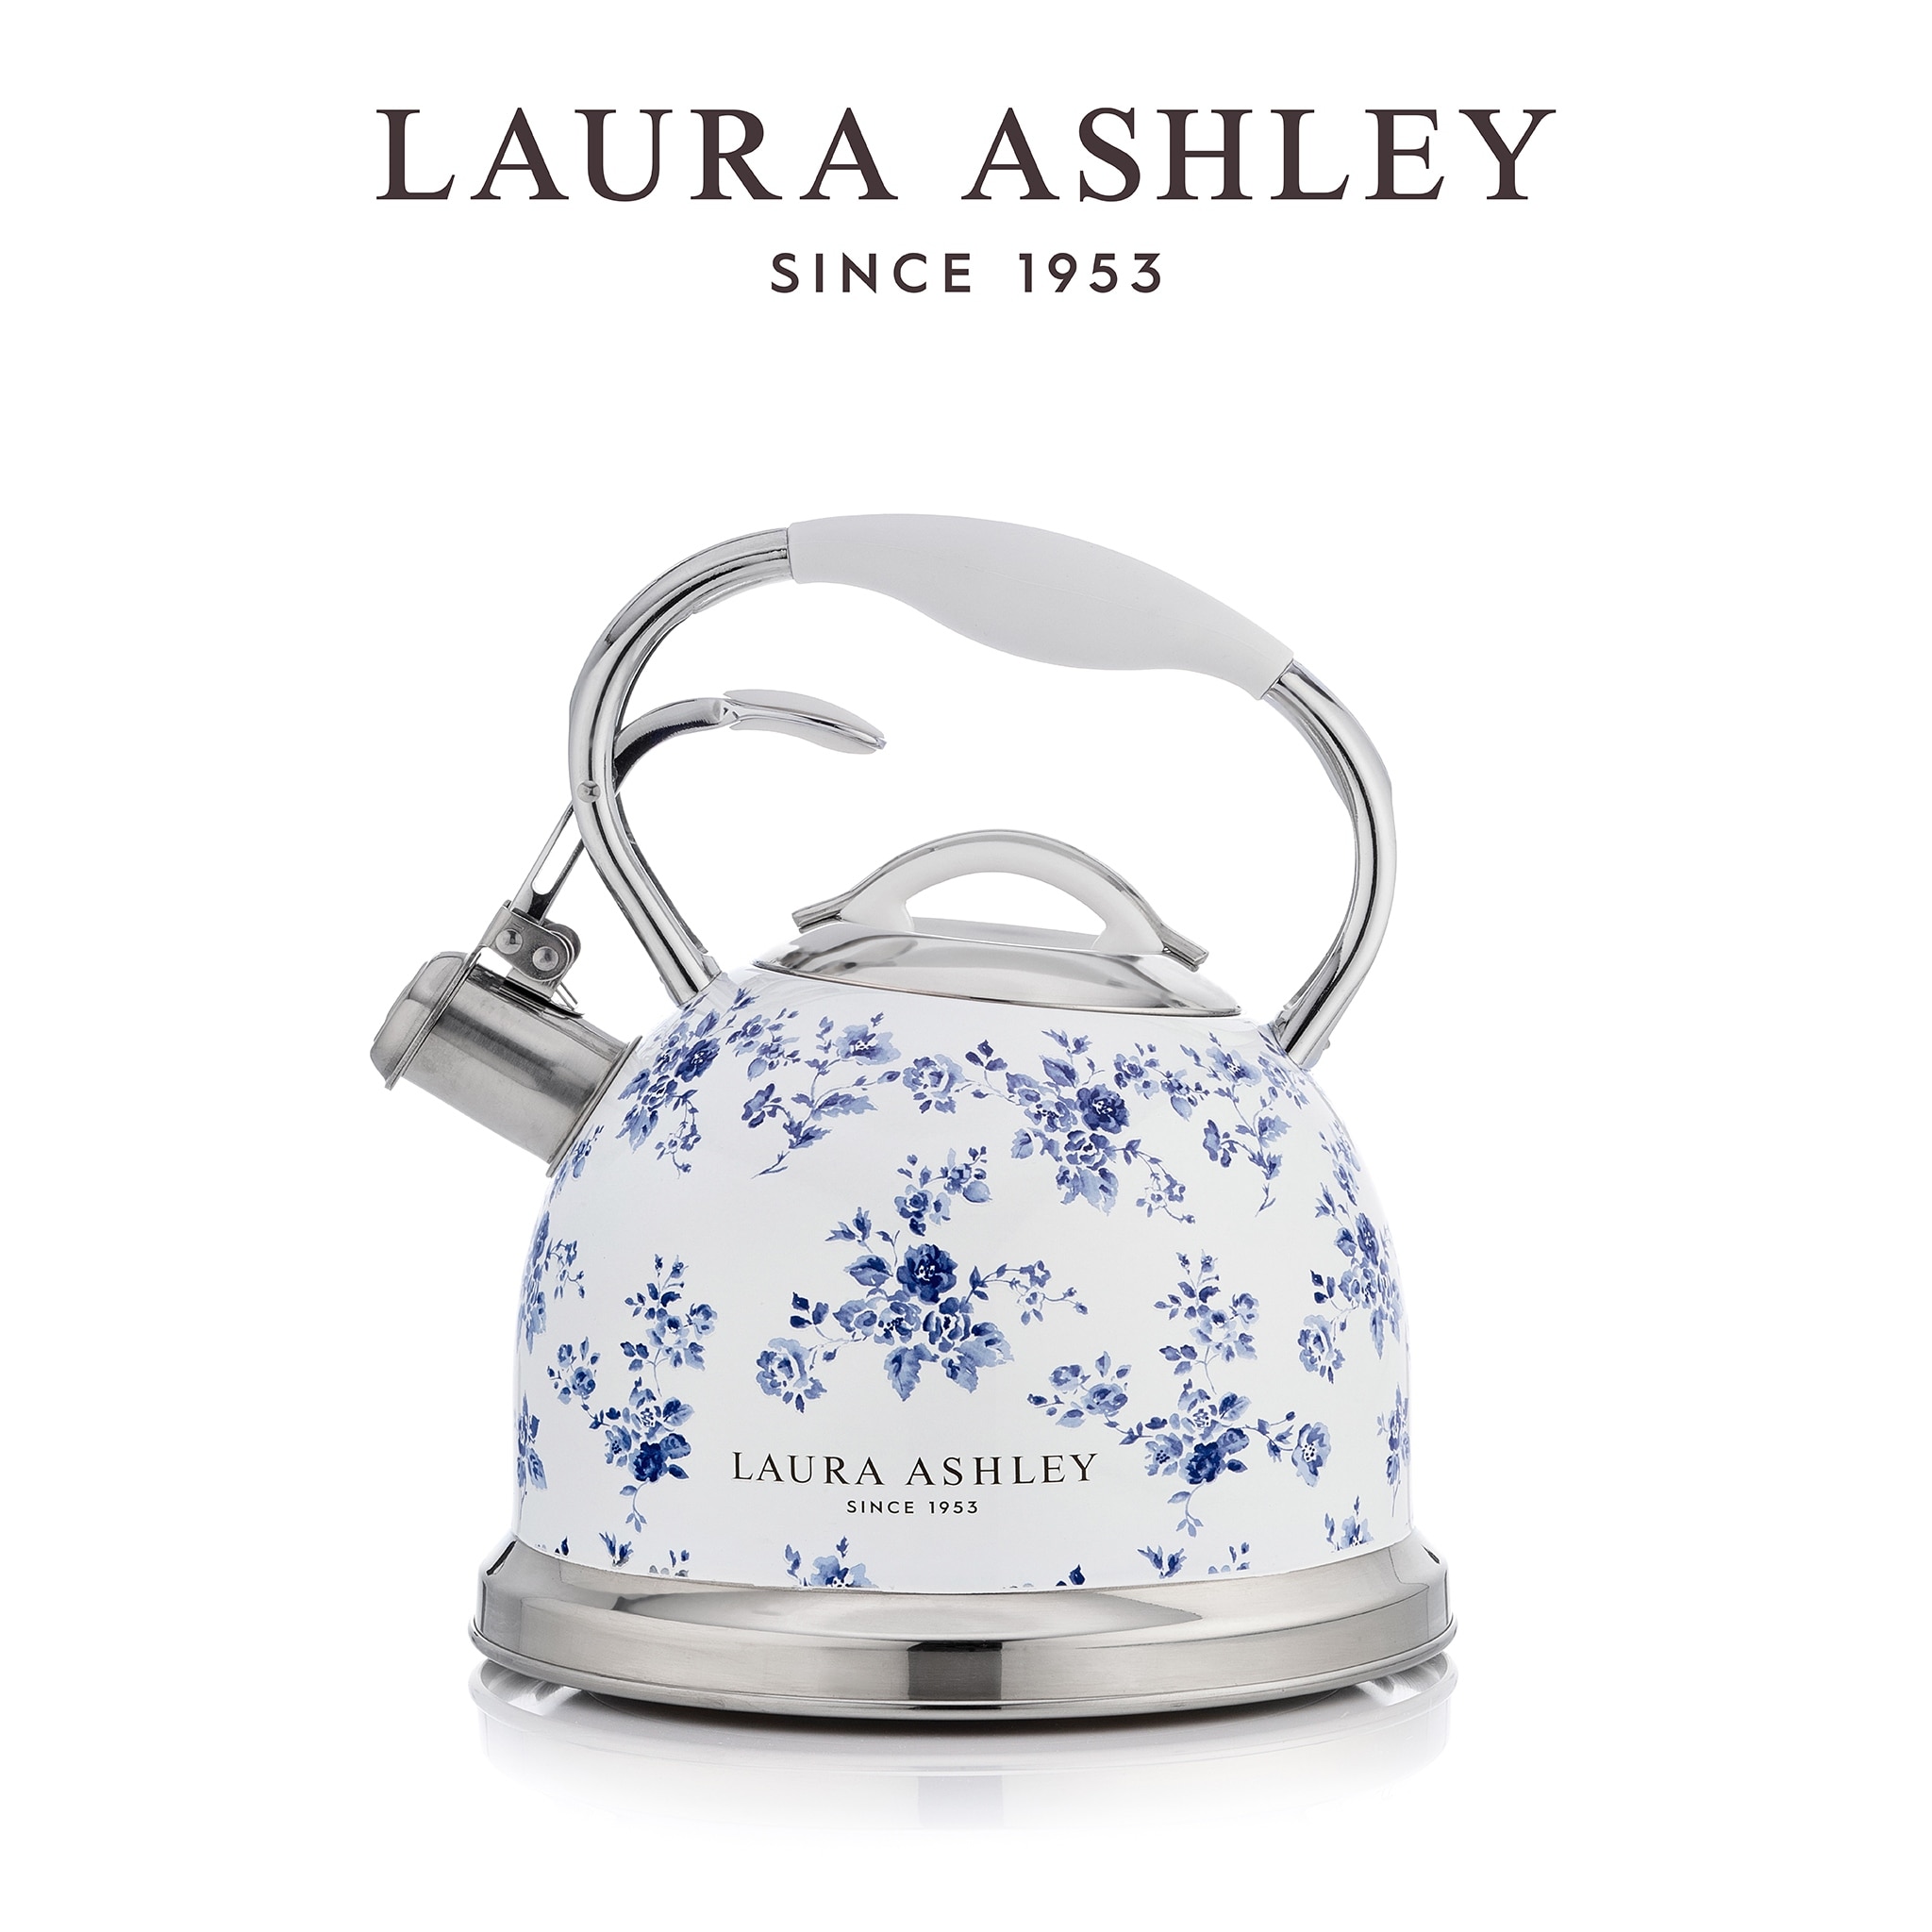 Laura Ashley 7 Cup Electric Jug Kettle with Rapid-Boil in China